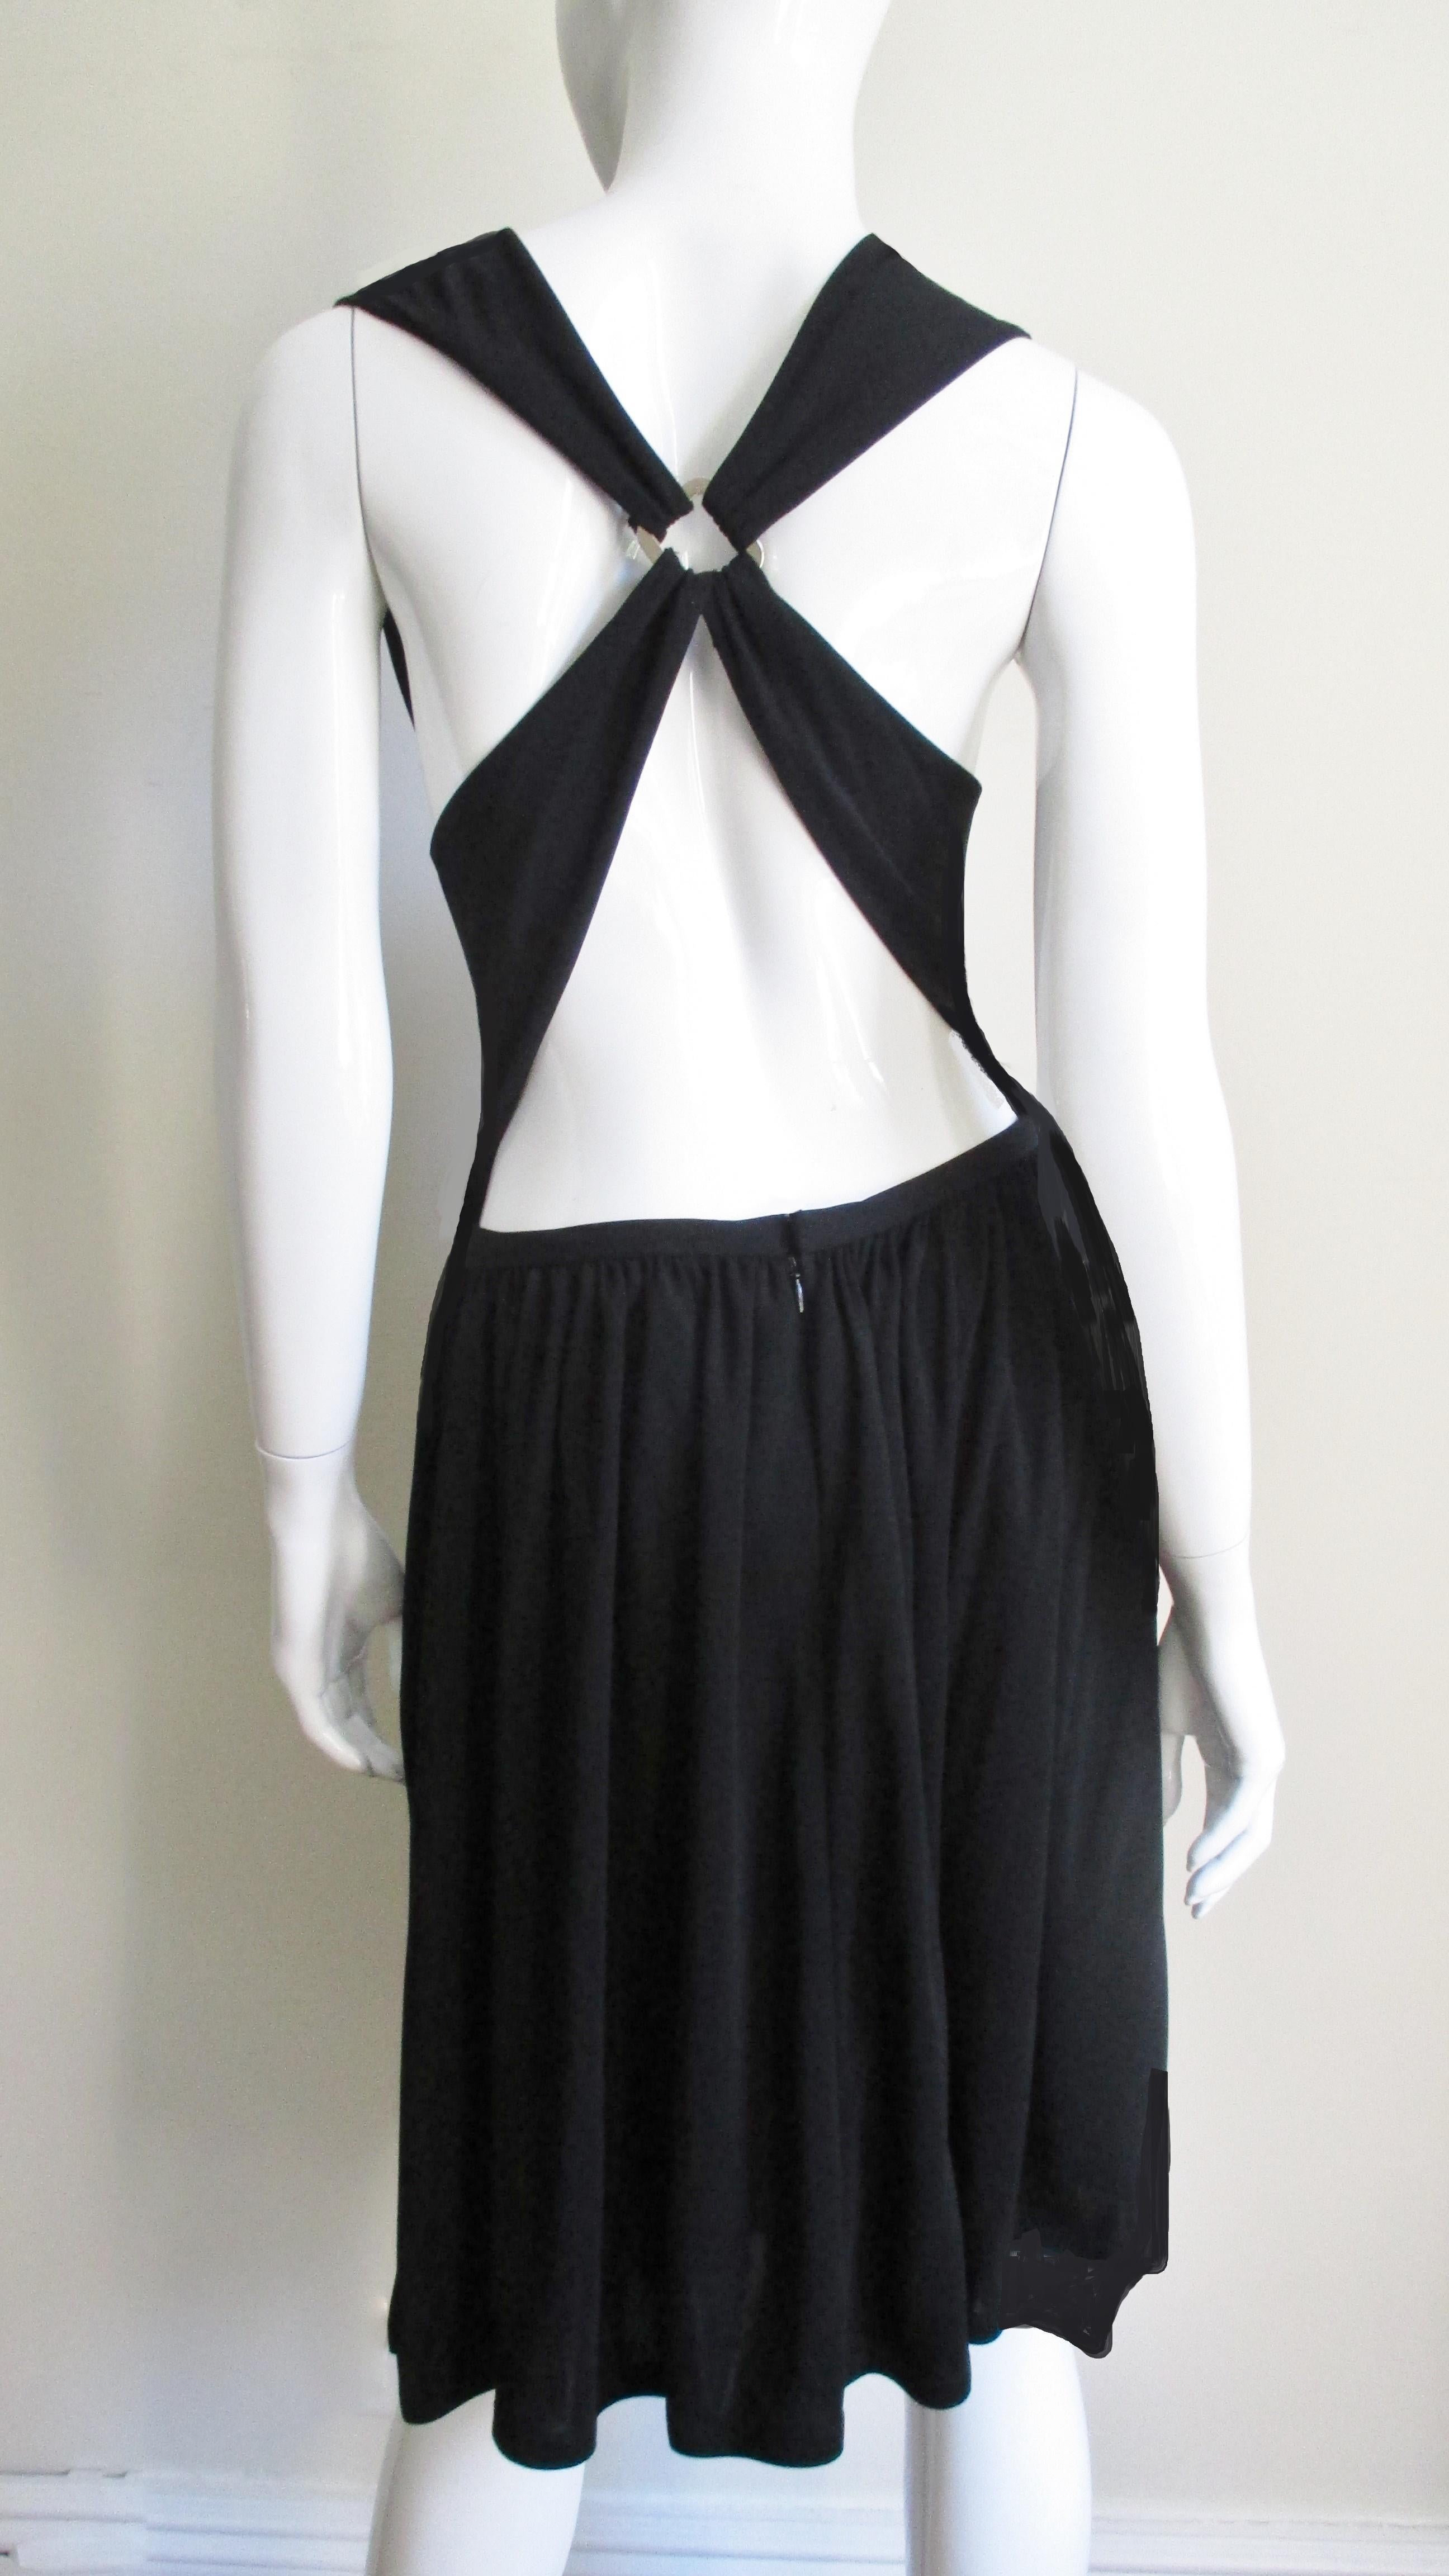 A simple black synthetic jersey dress from Bill Blass.  It has a fitted drop waist with a soft cowl V neckline.  A full skirt is gathered onto the bodice in the front and sits at the lower back.  The rest of the back is bare with the exception of 4